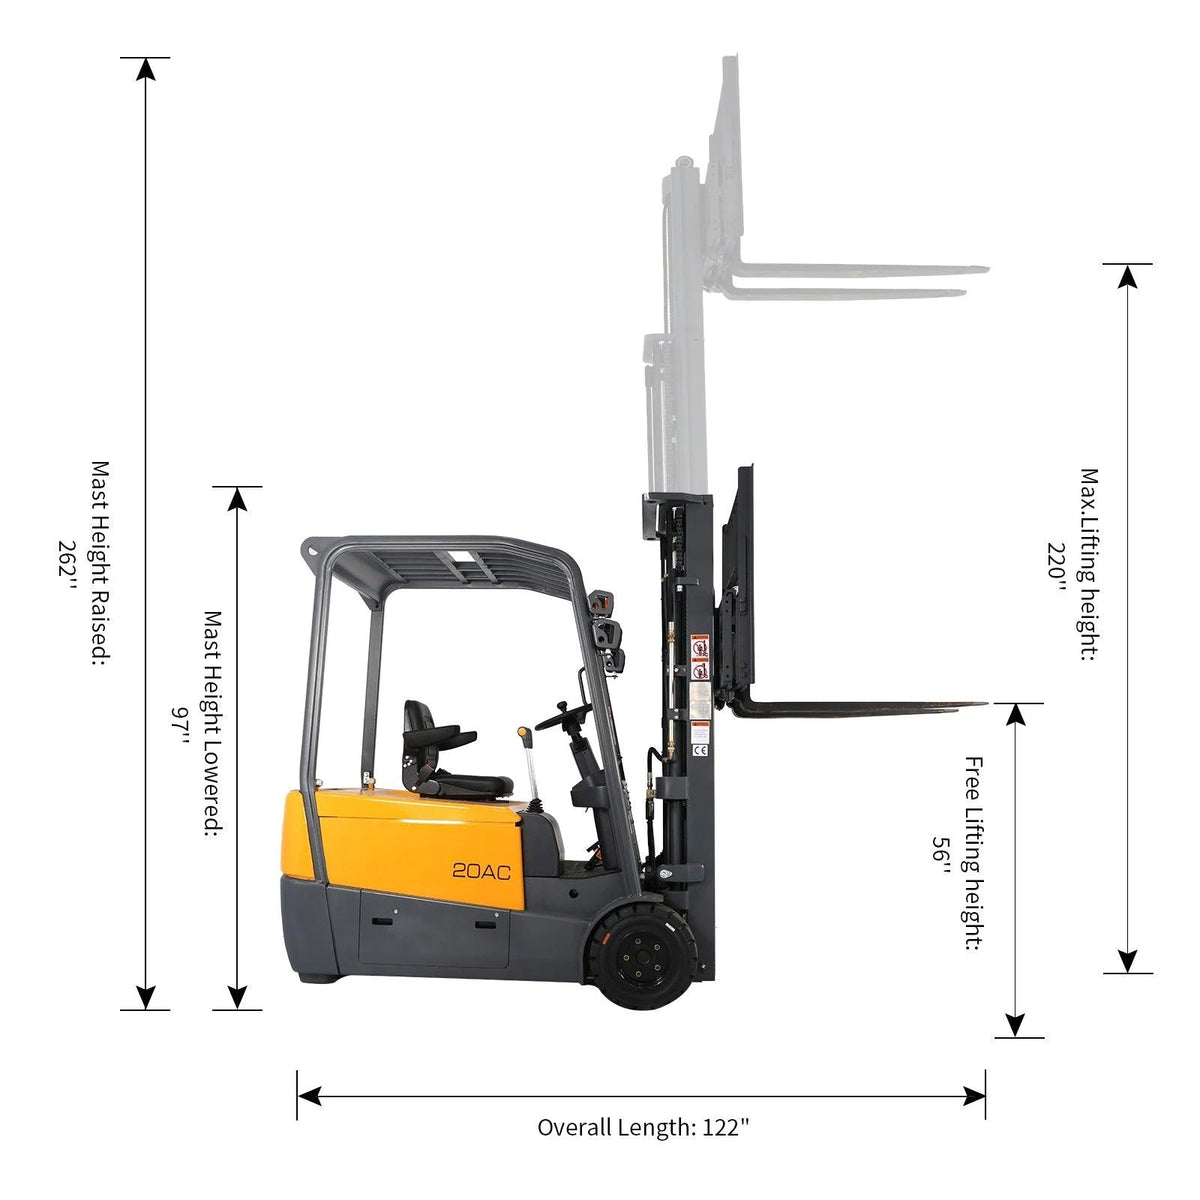 Apollolift 3 Wheel Lithium-Ion Battery Forklift 220" Lift 4400 lbs. Capacity Heat Film Optional New